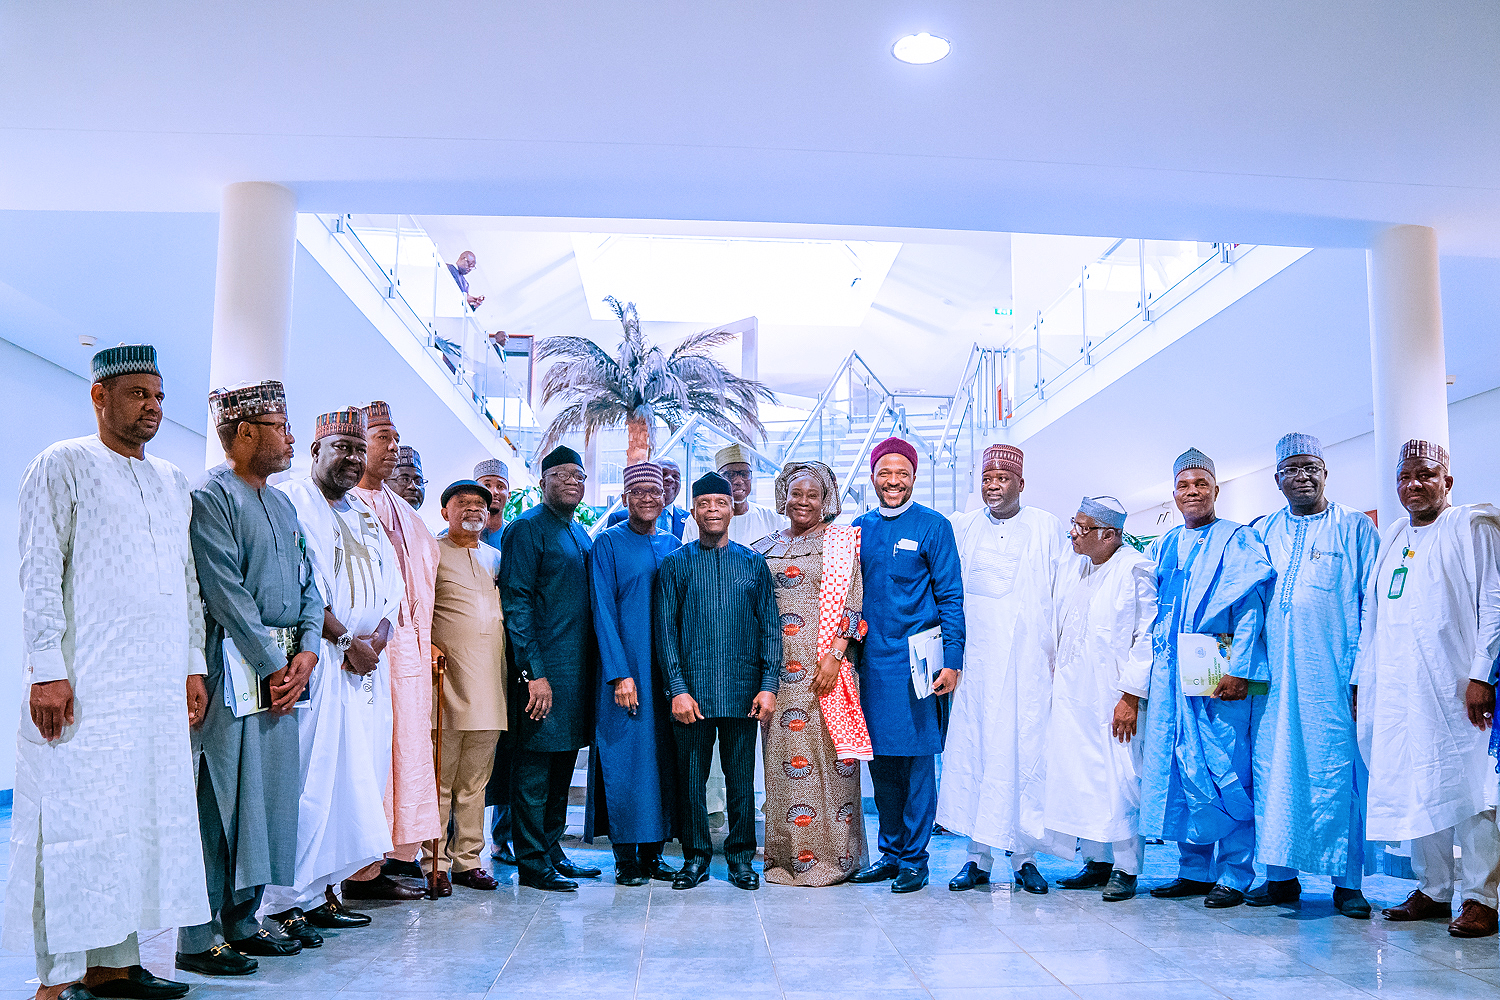 Our Plans To Address Skills Gap & Employability In Nigeria – VP Osinbajo At Inauguration Of National Council On Skills